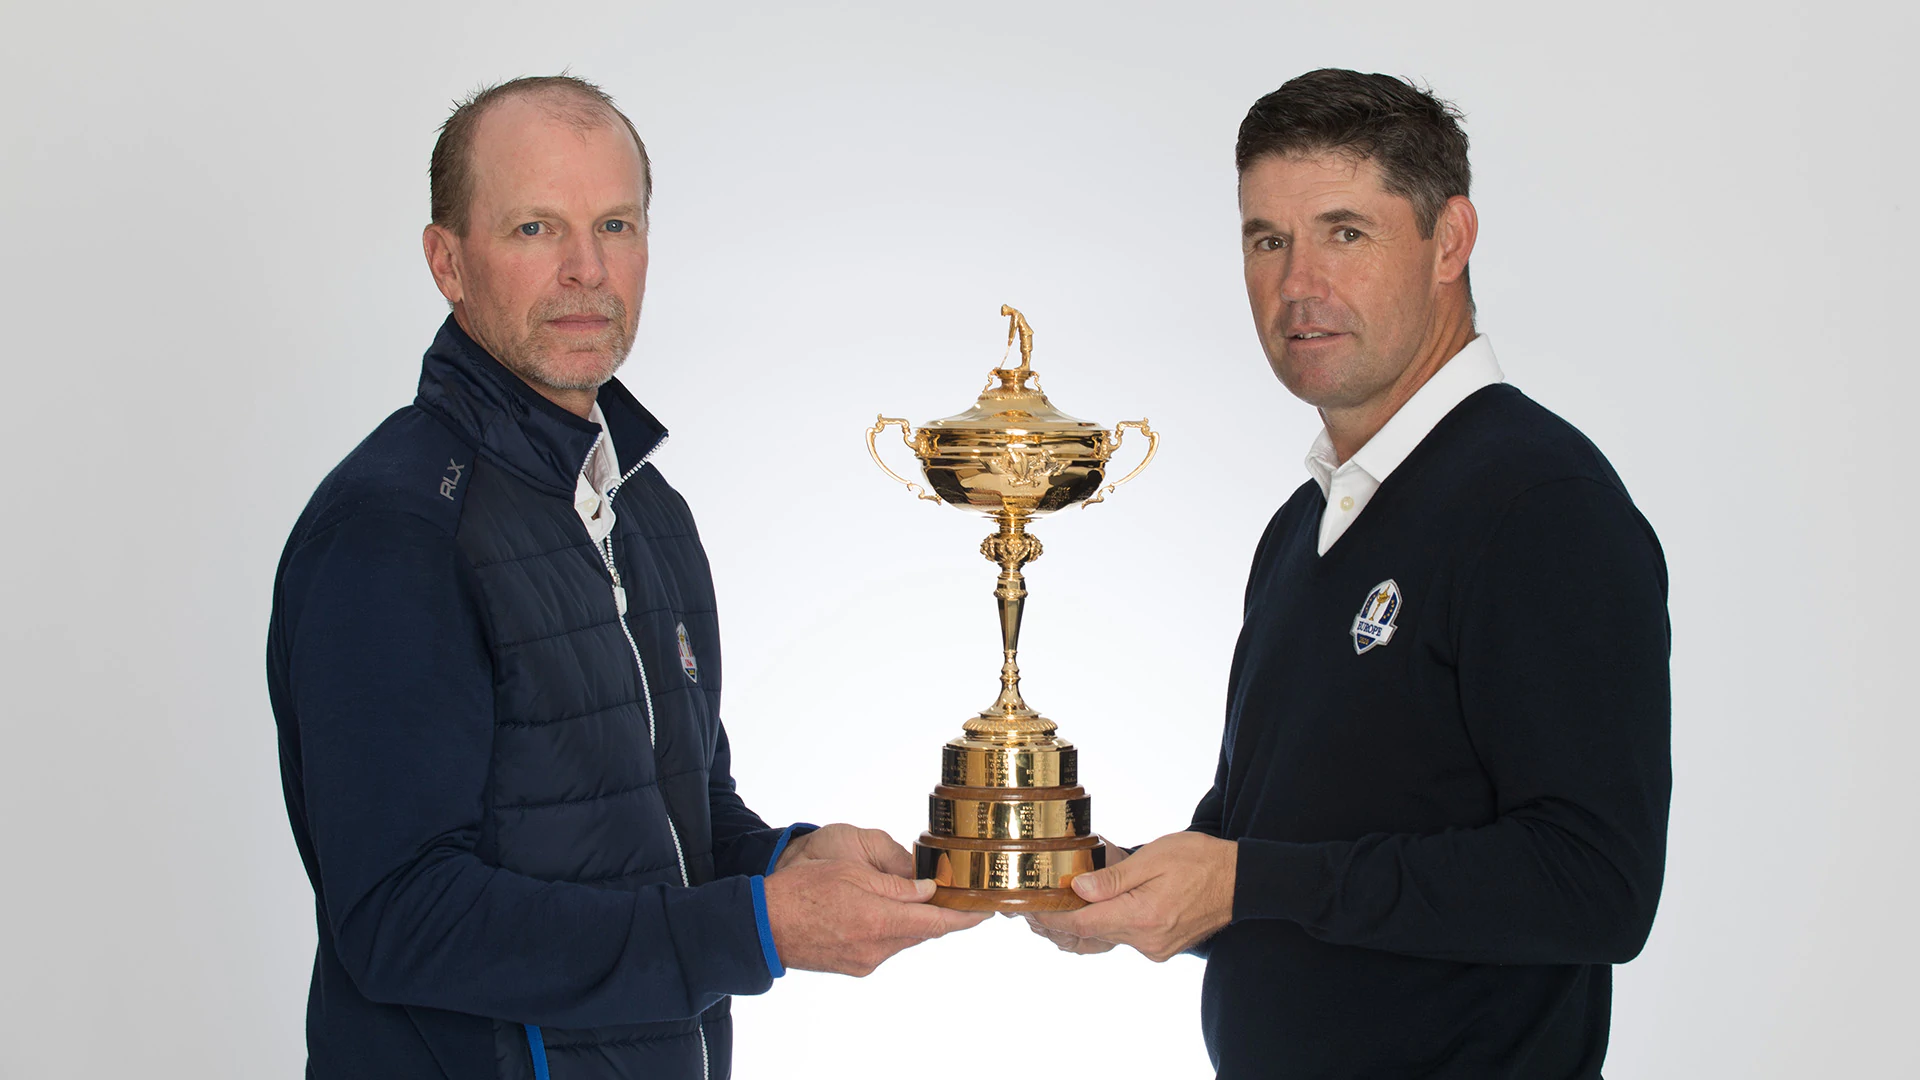 Source: Ryder Cup to be postponed until 2021 because of coronavirus pandemic